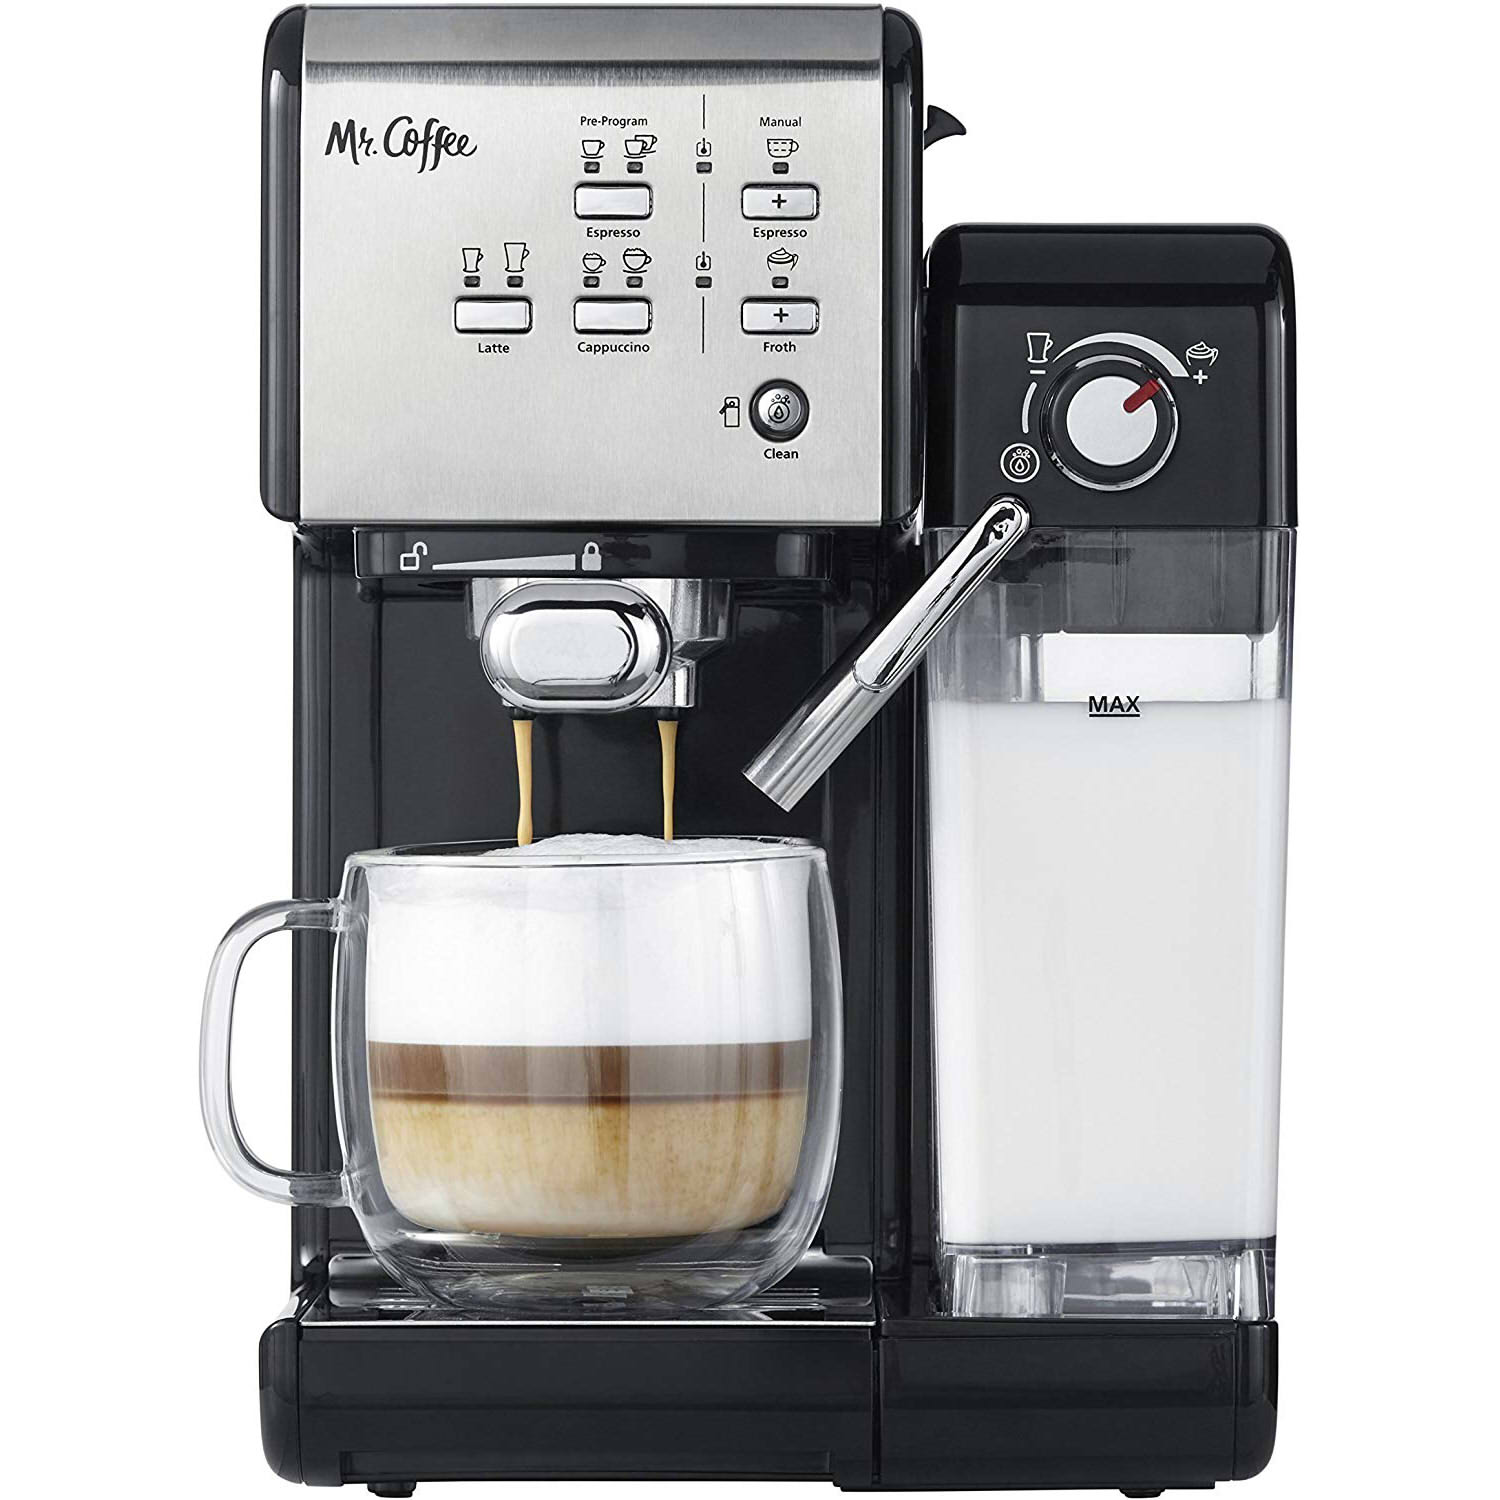 Mr. Coffee One-Touch CoffeeHouse Espresso Maker